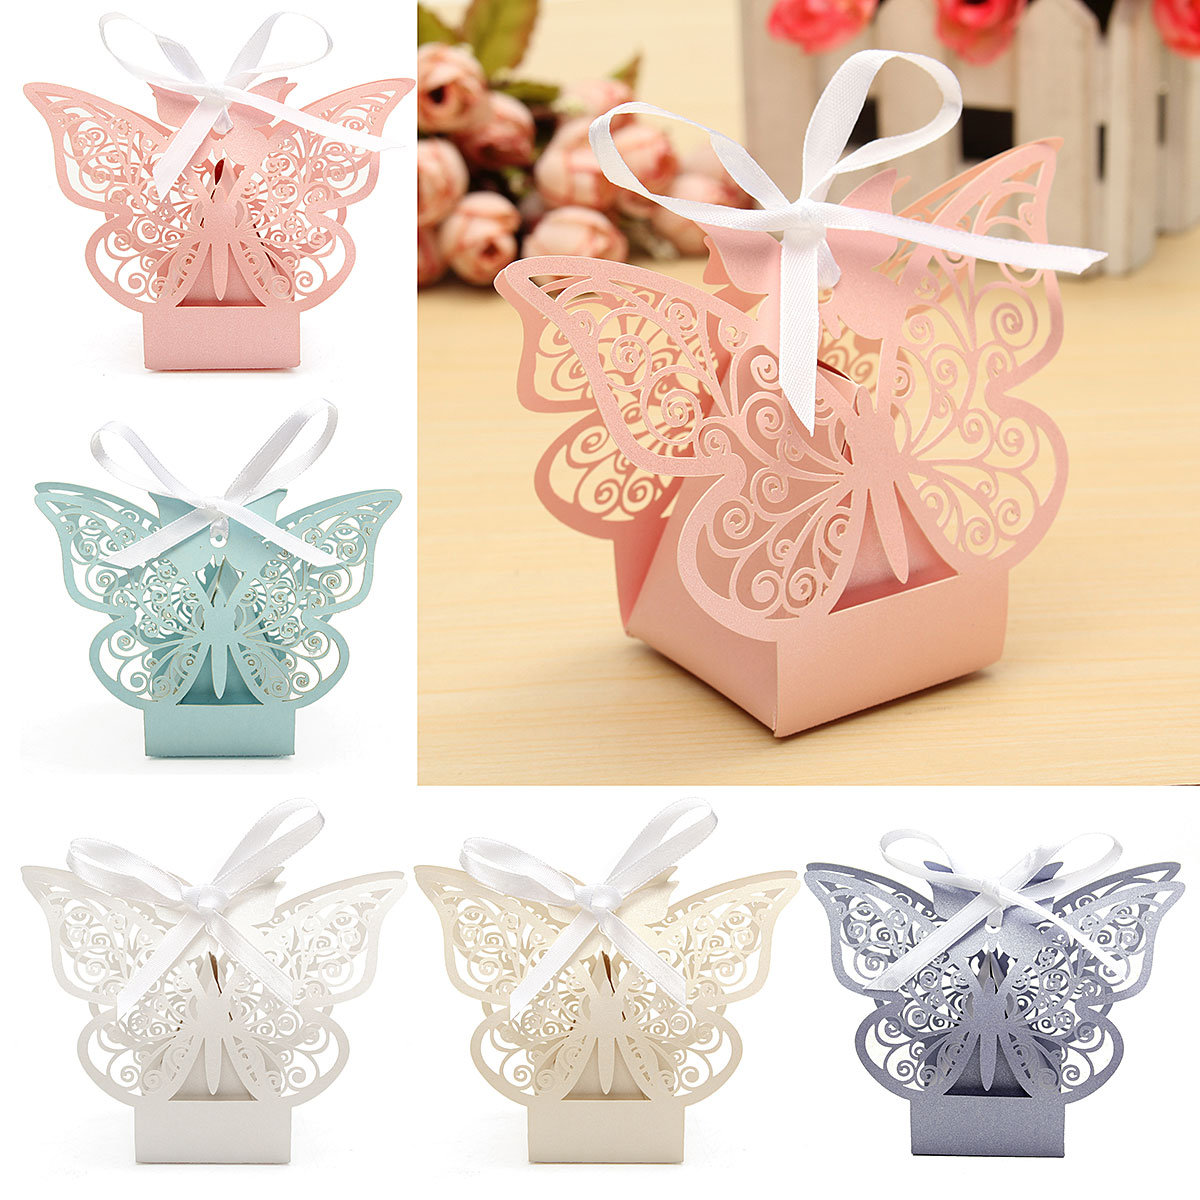 

10 Pcs Butterfly Lace Hollow Out Paper Candy Boxes Wedding Favors Sweets Bags Table Decoration, White pink light purple ivory blue